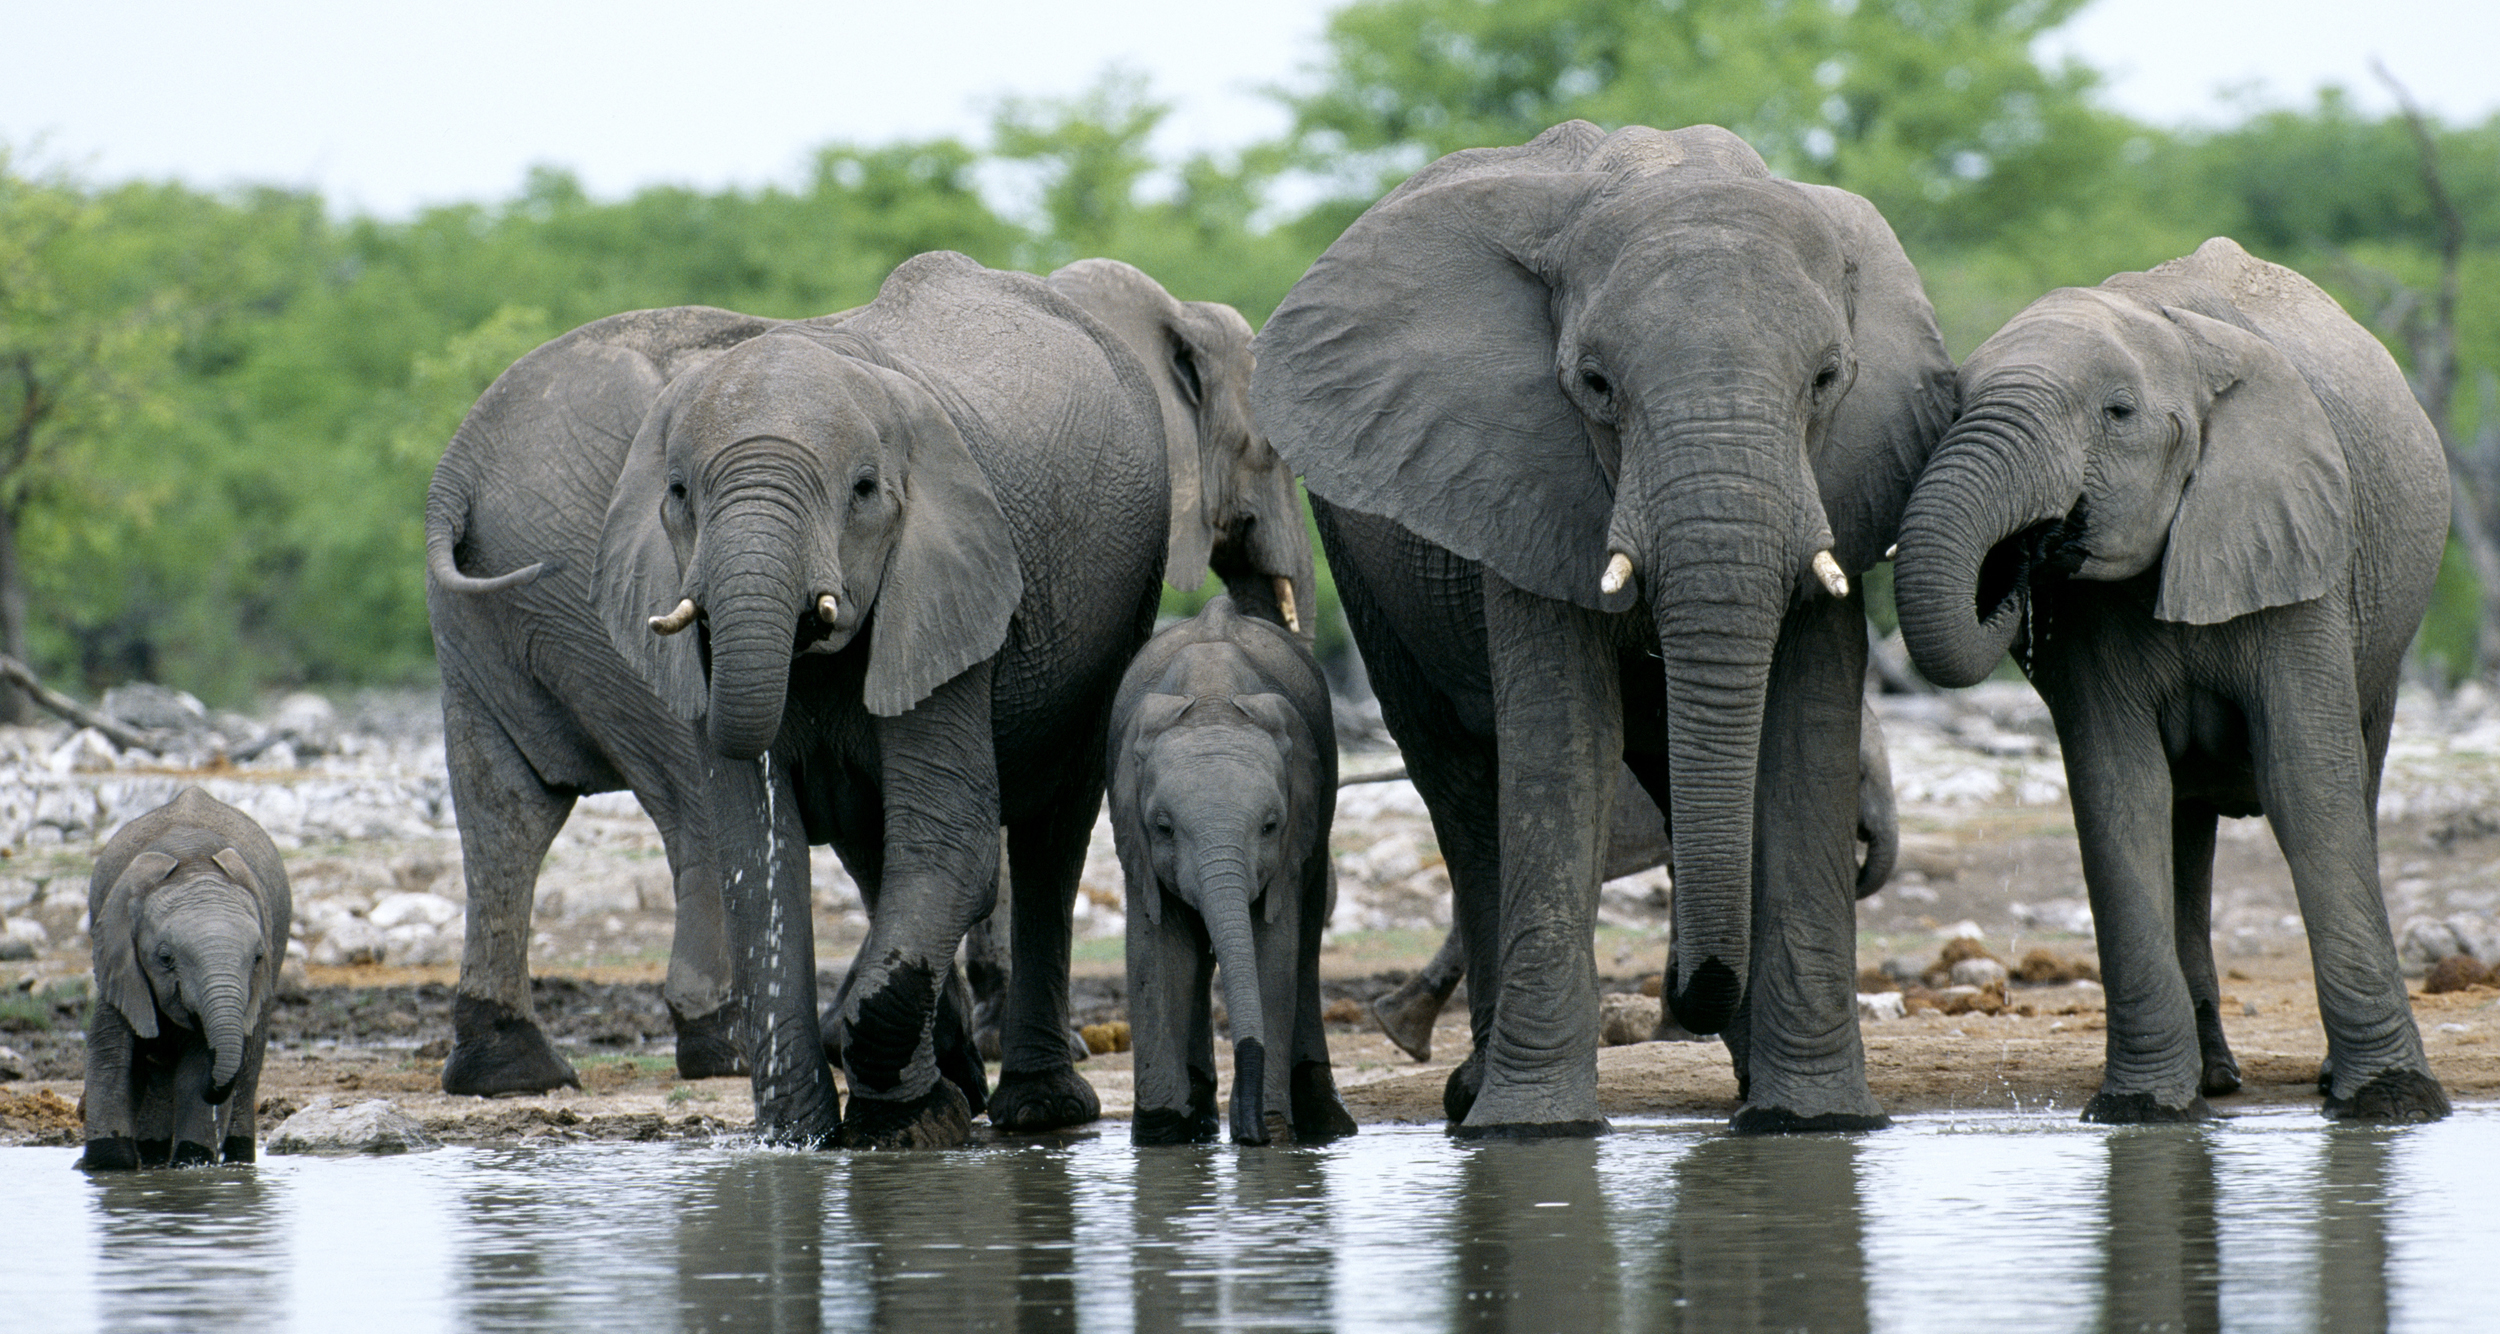 PHOTO: Elephants are pictured at a water hole in Etosha National Park, Namibia.